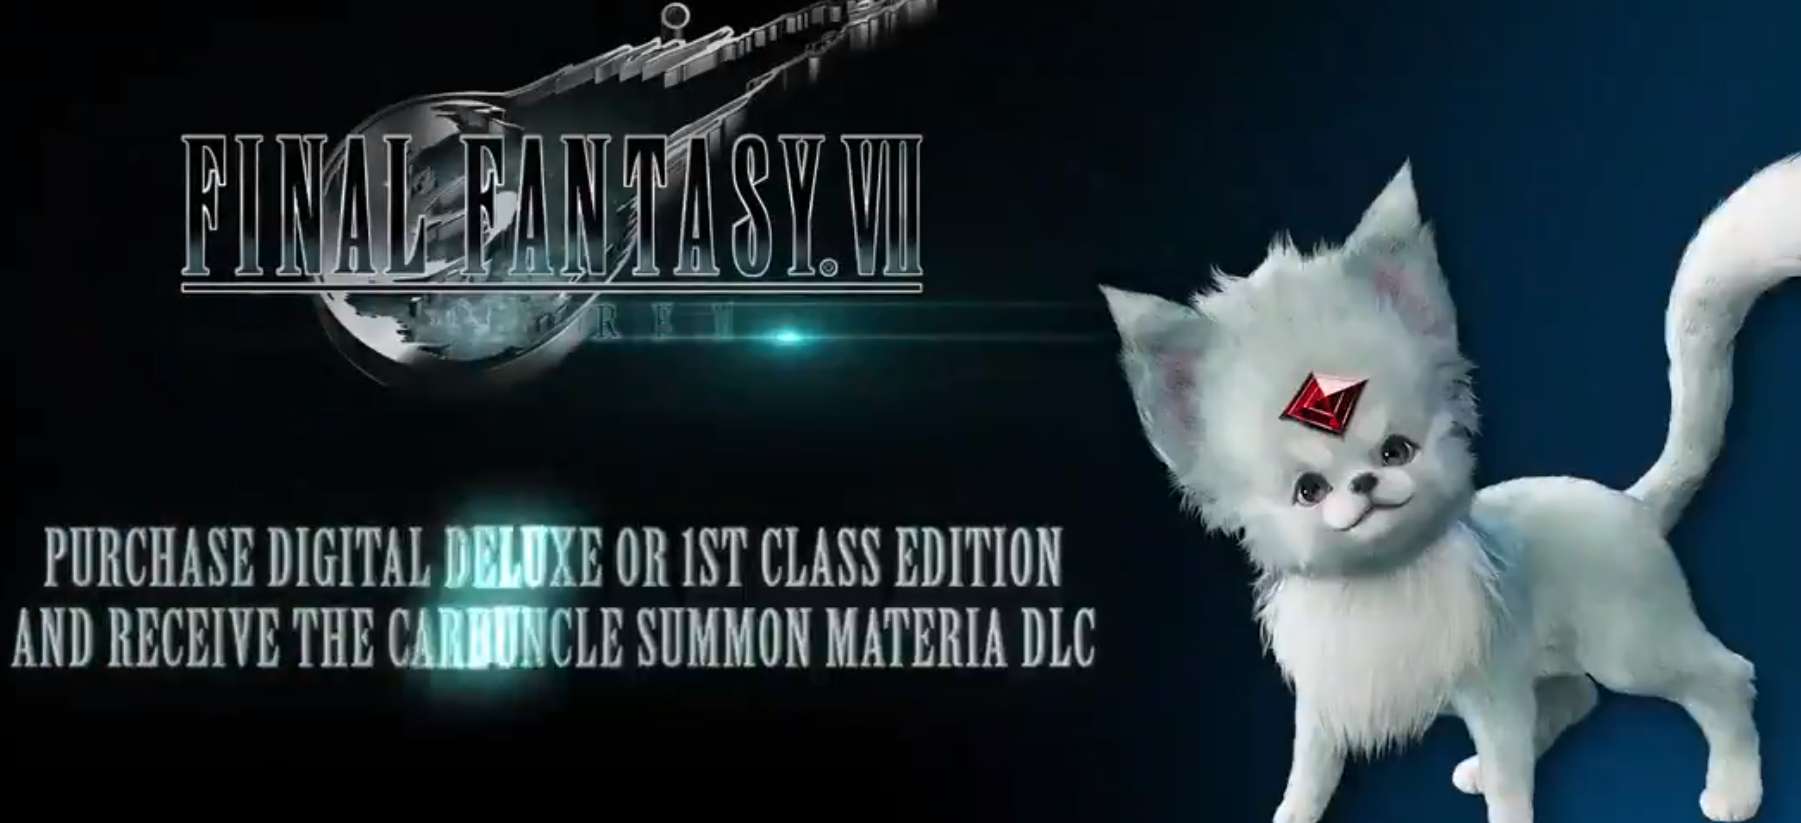 Final Fantasy VII Remake Shows Off Three Adorable Summons In A Series Of Tweets